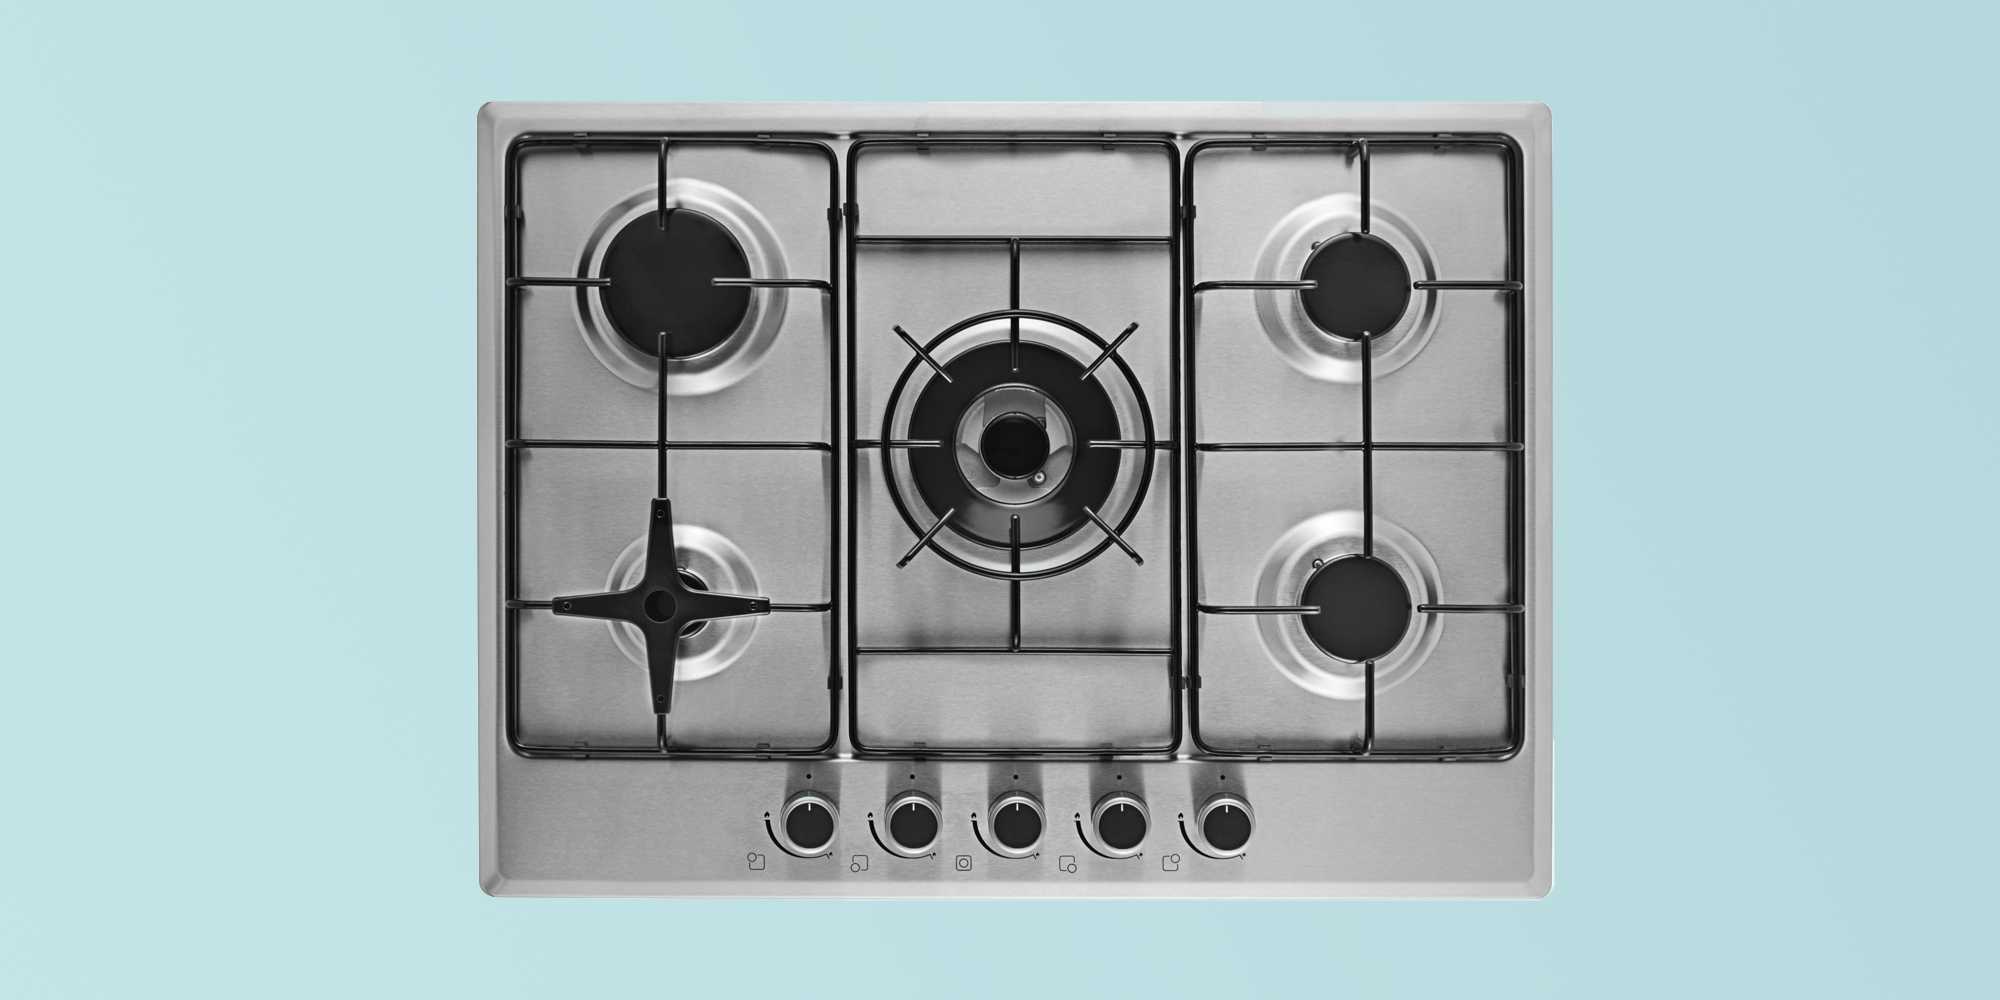 9 Best Gas Range Stove Reviews 2020 Top Rated Gas Ranges